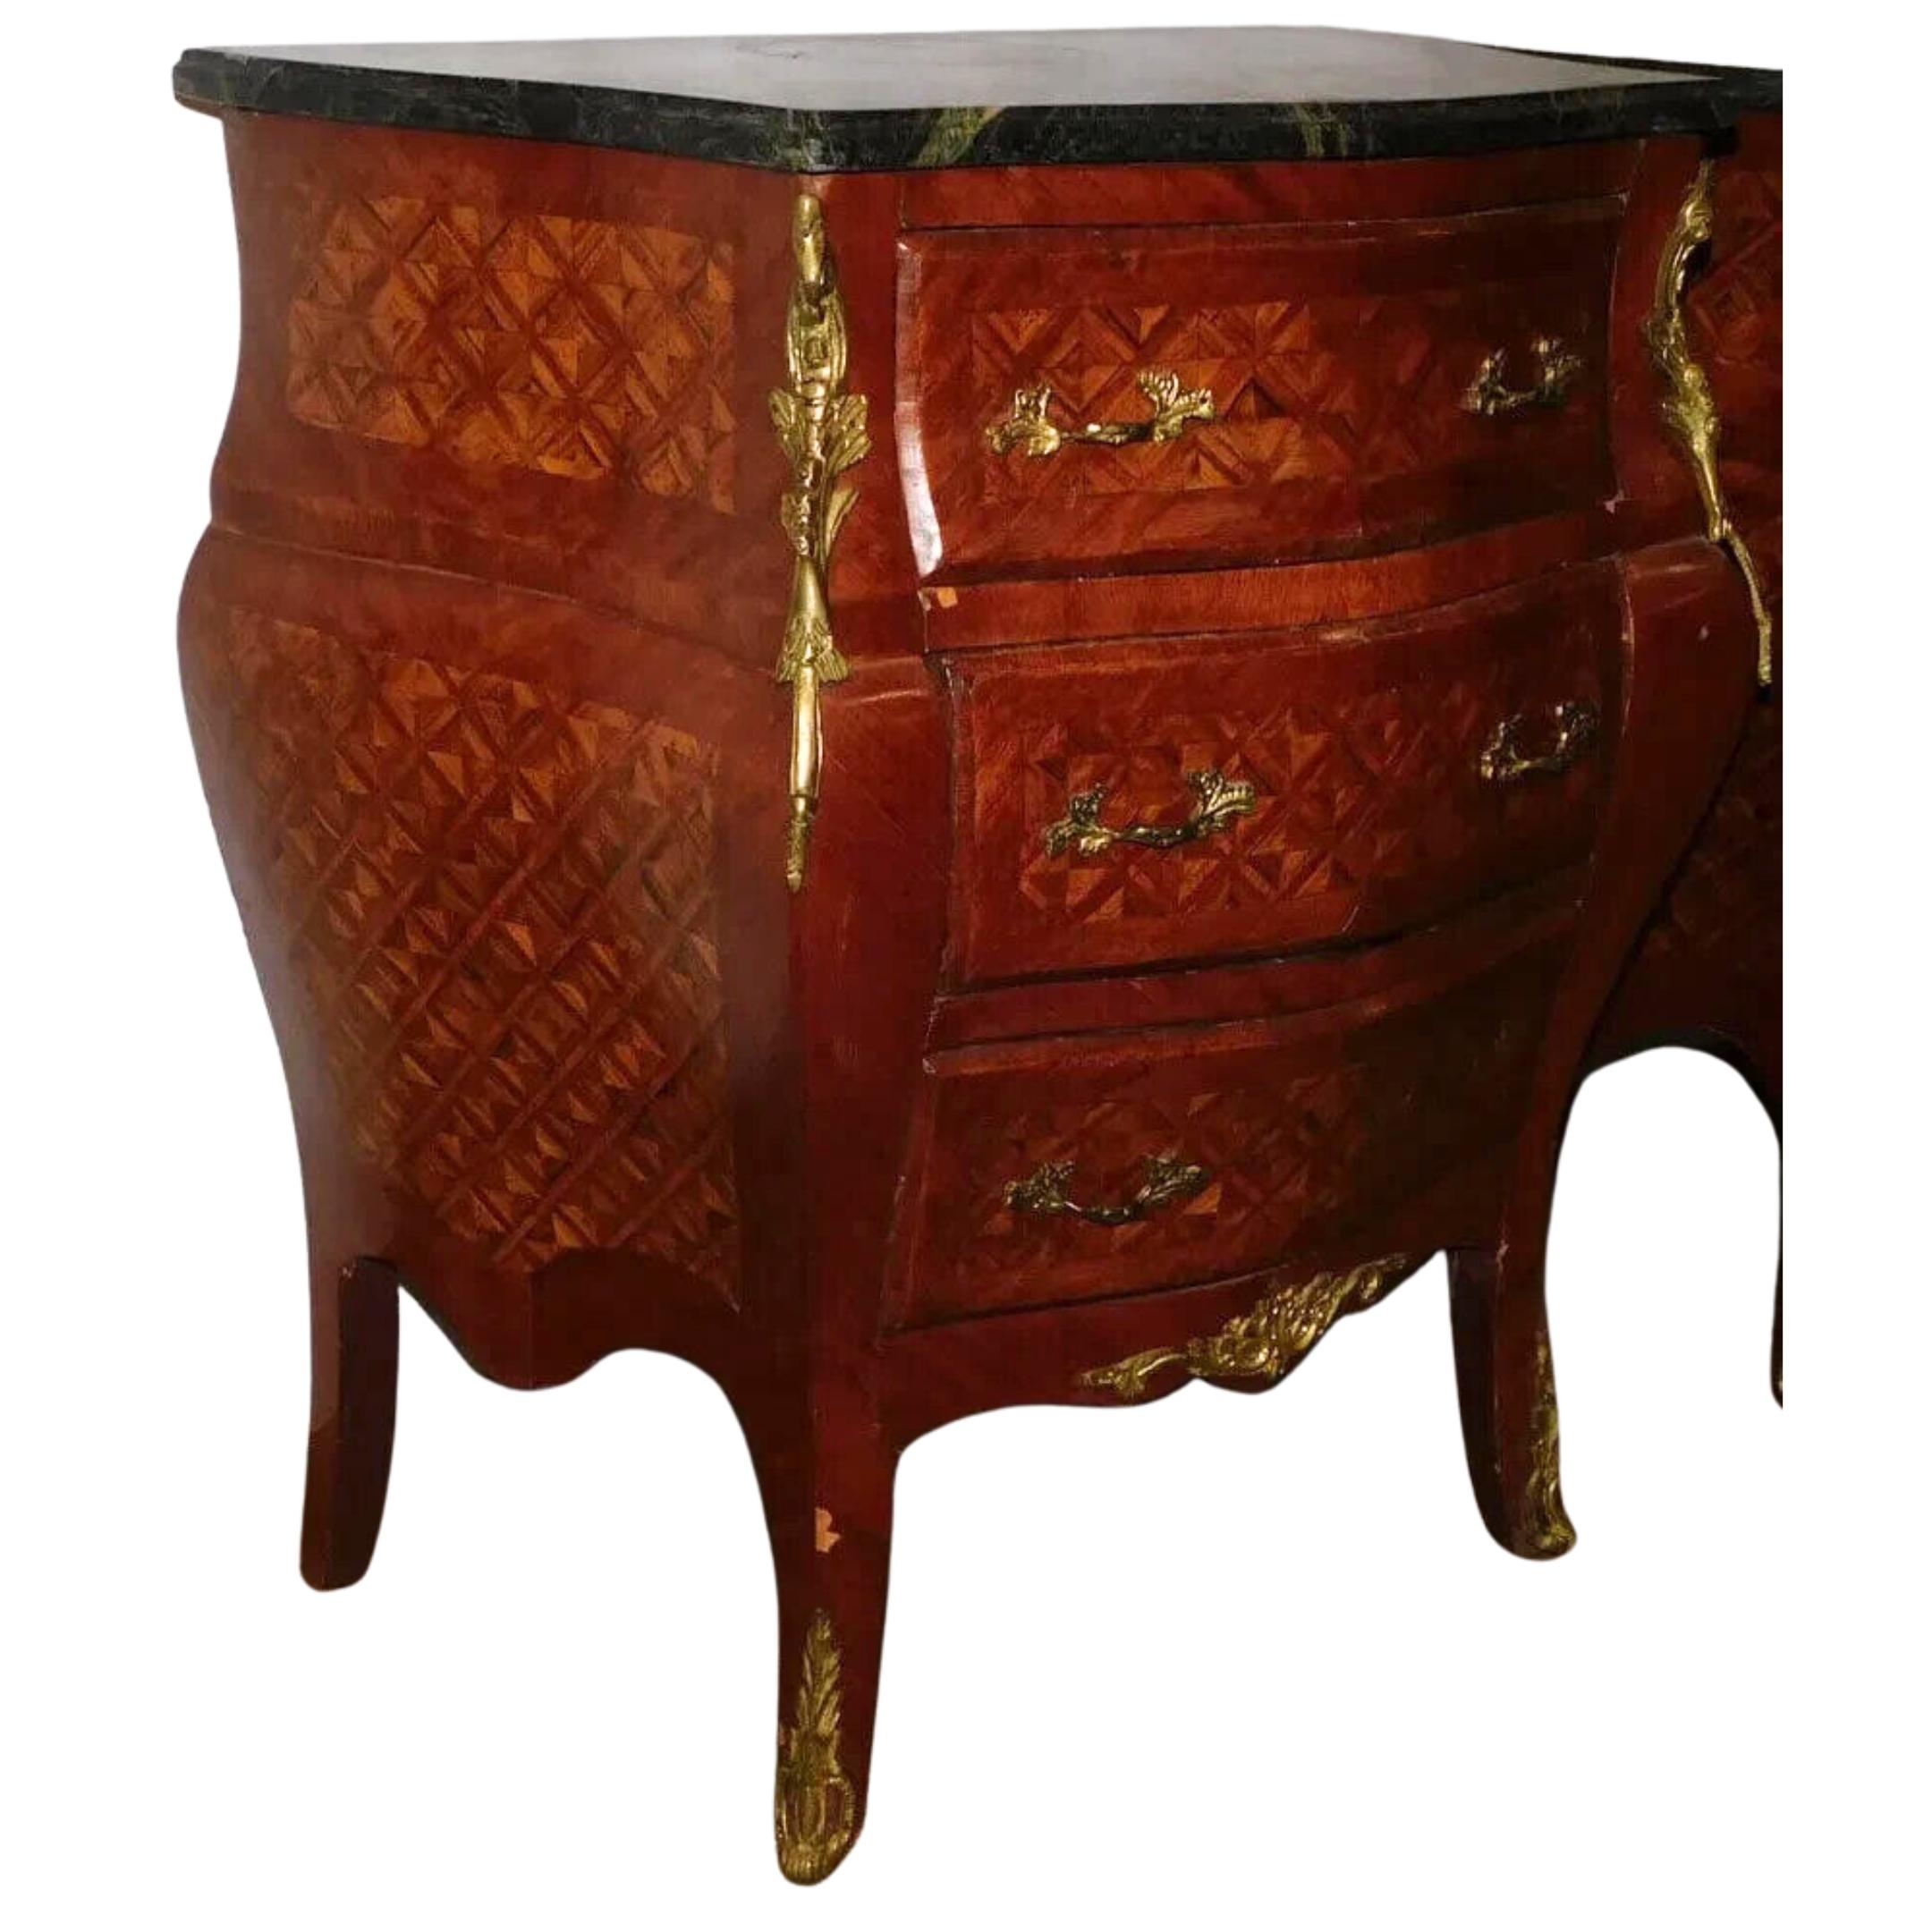 Commodes, Pair, Walnut Inlay, Marble Top, Diminutive, With Bronze Mounts!!

Add a touch of sophistication to your bedroom or guestroom with this exquisite pair of commodes. The stunning walnut inlay and marble top create a perfect blend of style and